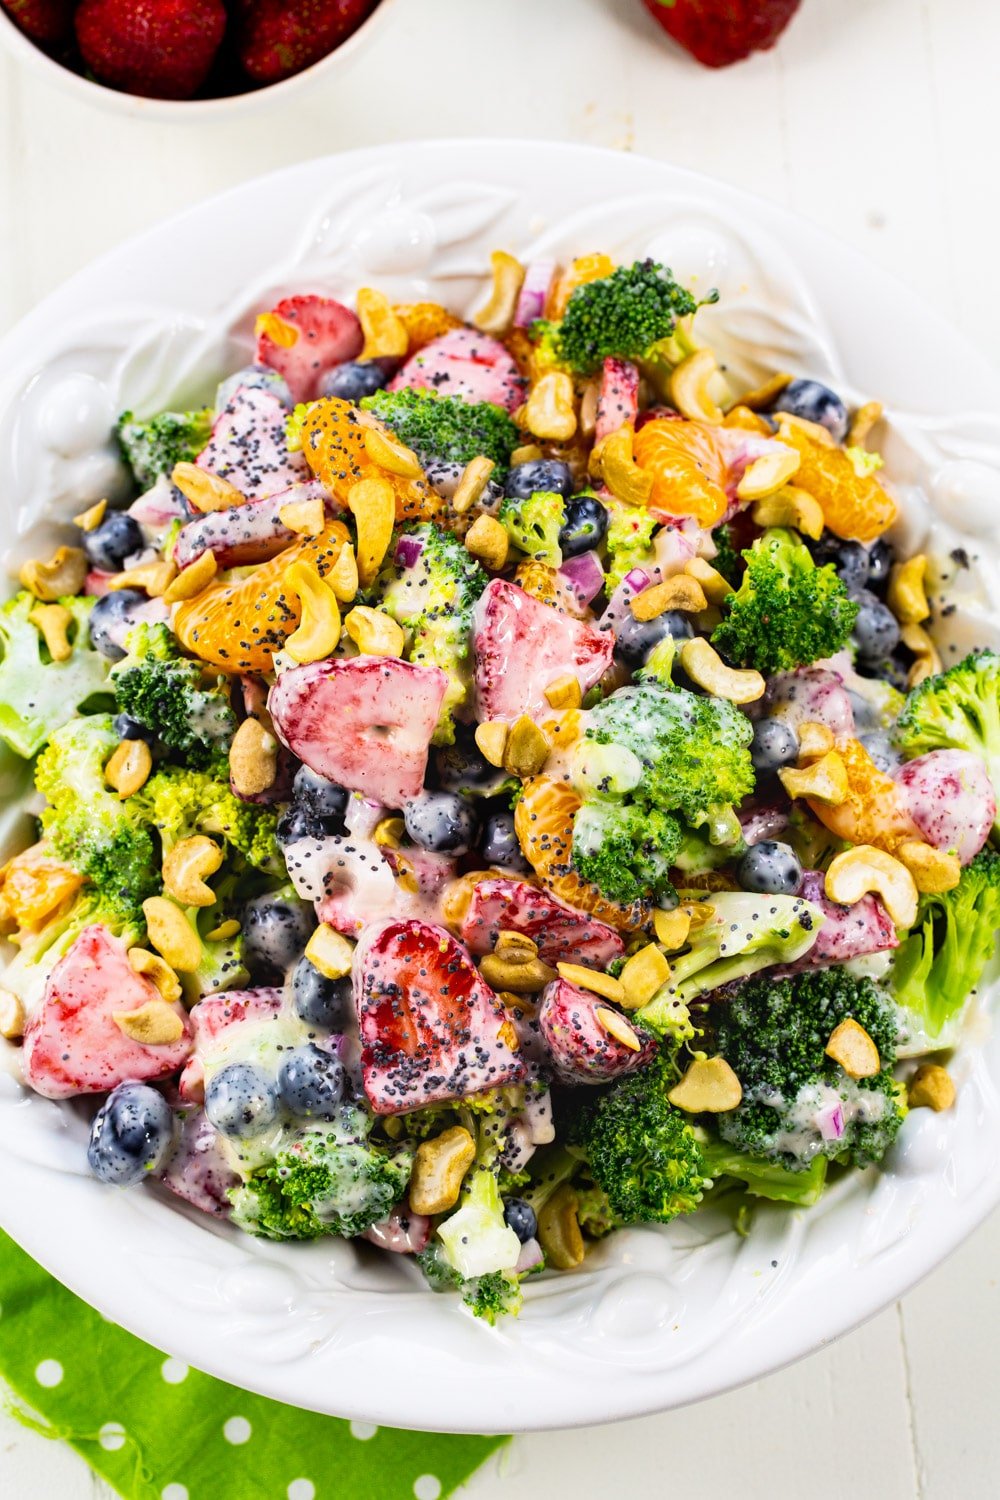 Overhead of Broccoli Salad with strawberries, blueberries, and mandarin oranges.